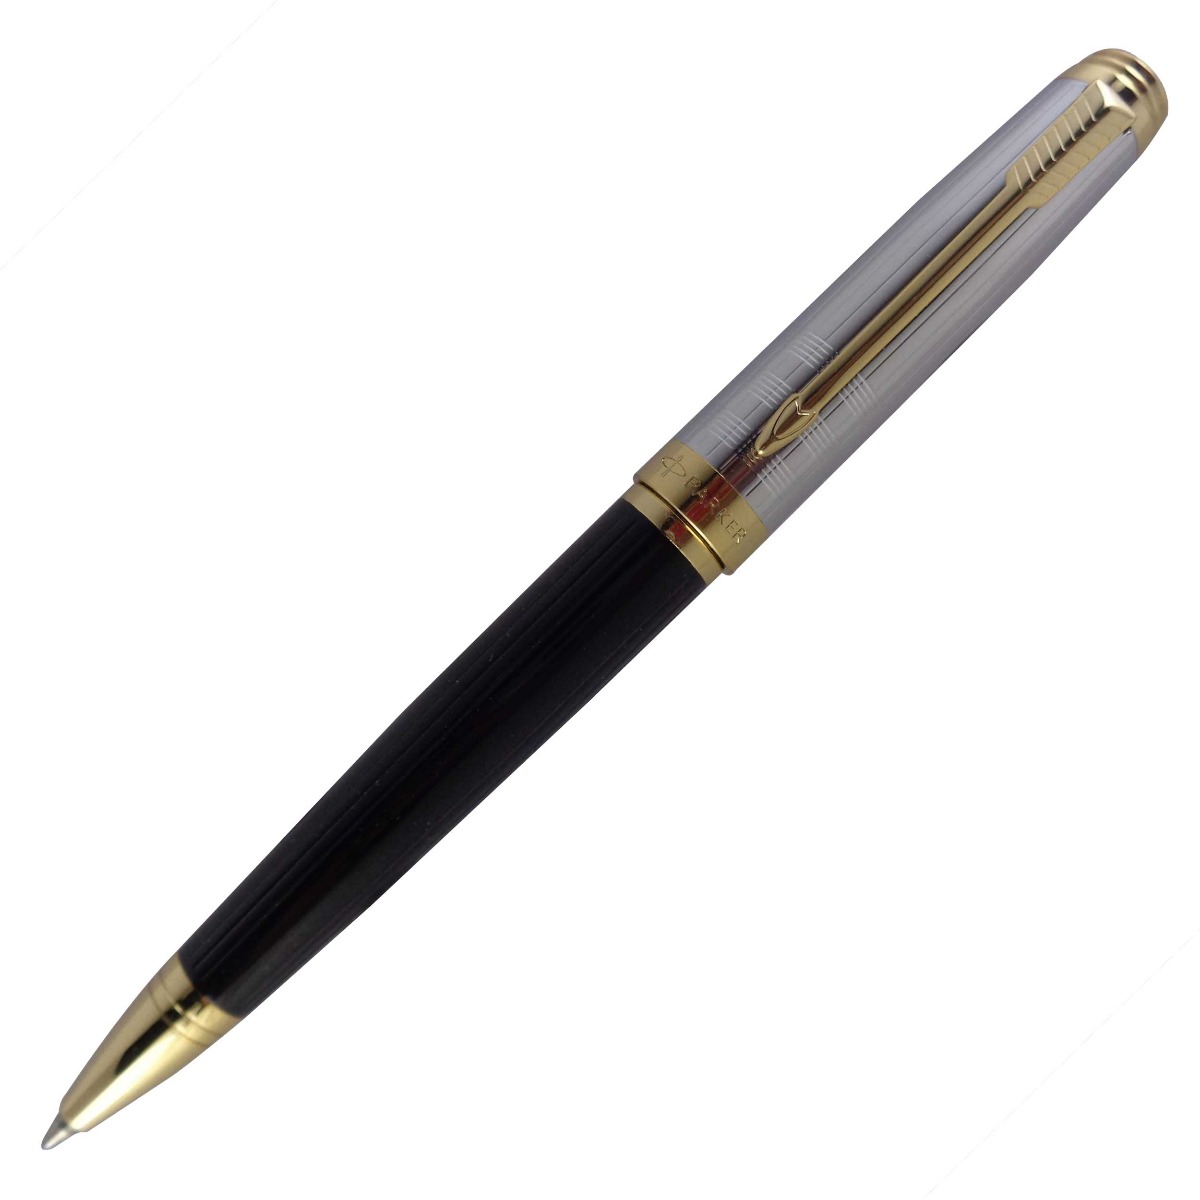 Parker Model: 15008 Ambient deluxe Black color body with silver cap medium tip with free power bank twist type ball pen